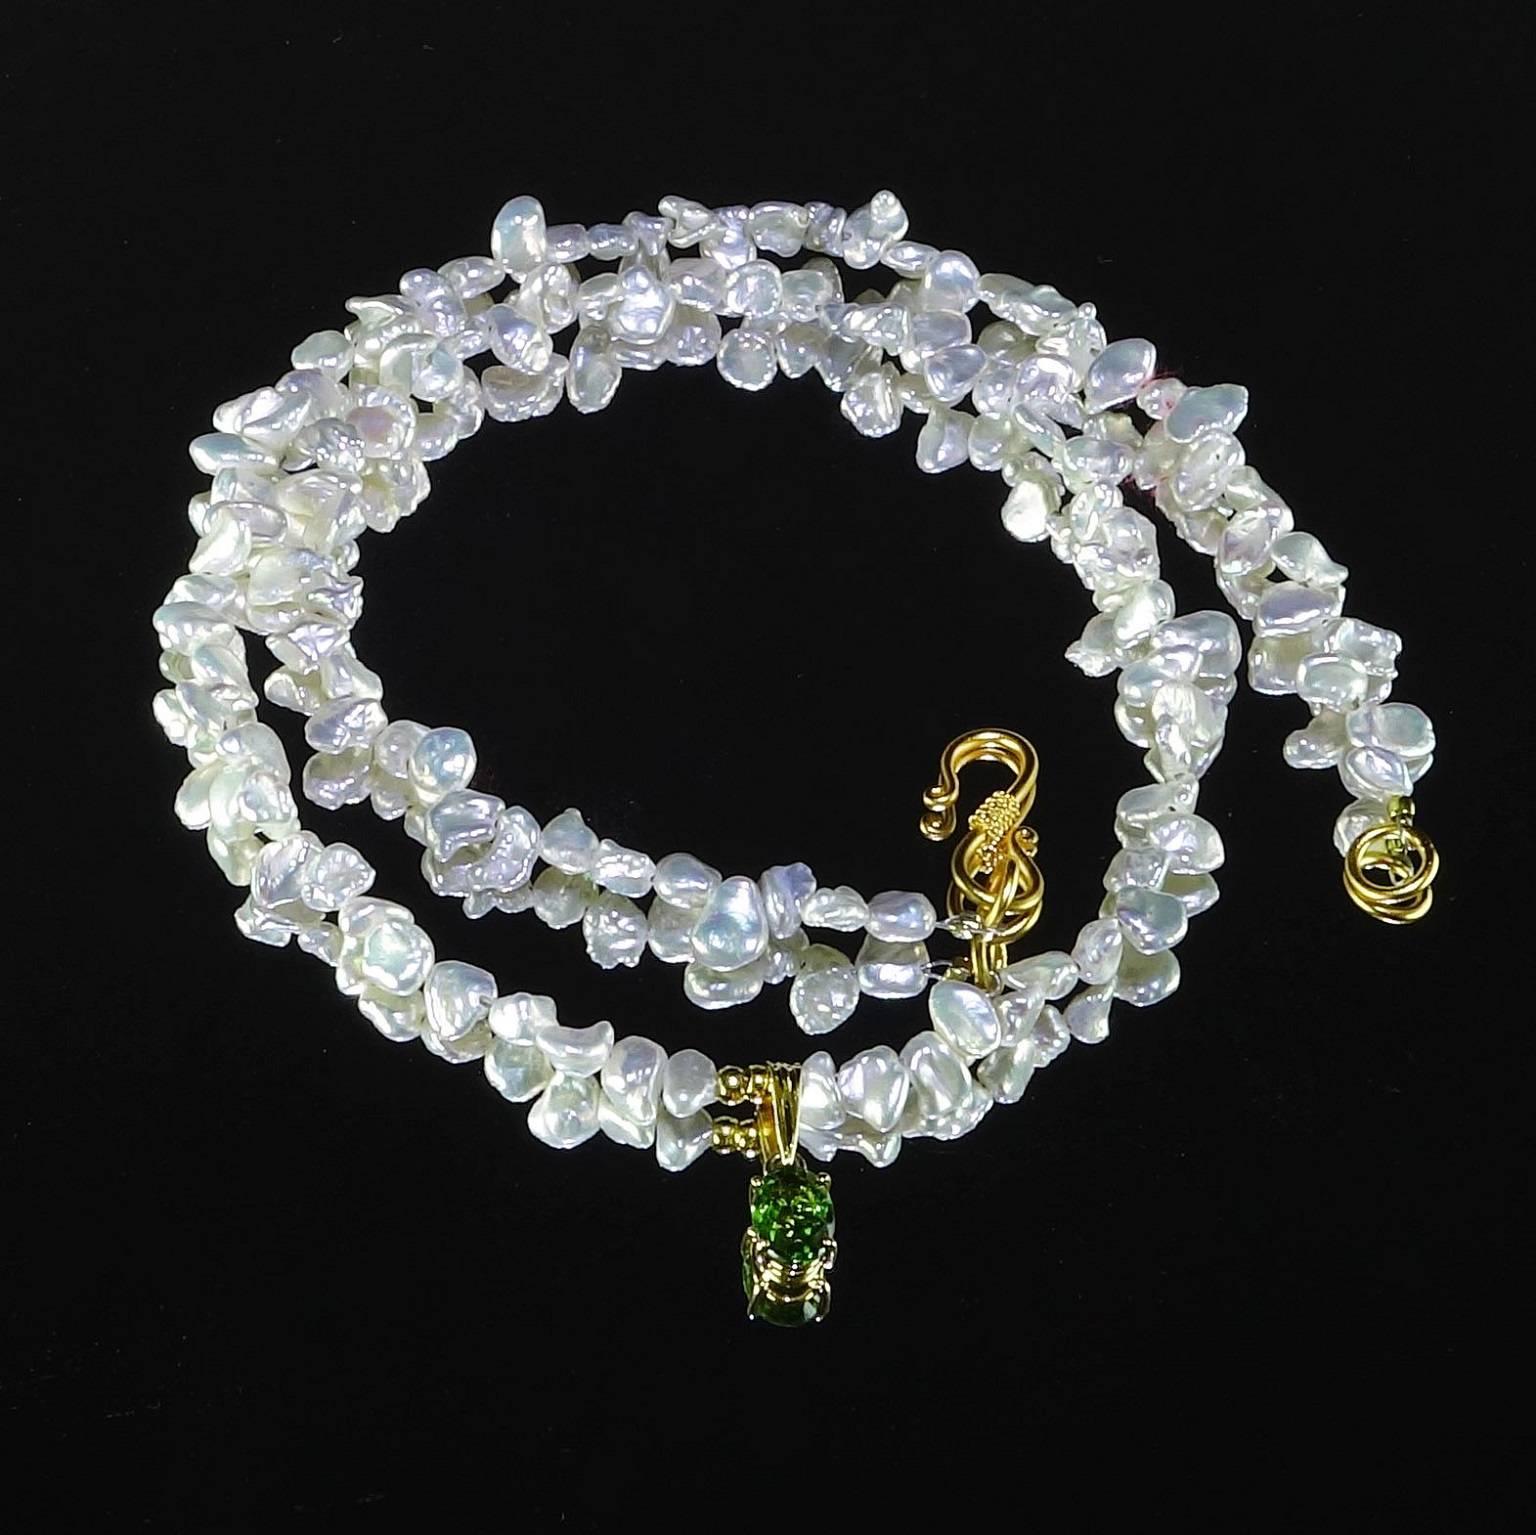 AJD Pearl Necklace with Green Tourmaline Pendant 2